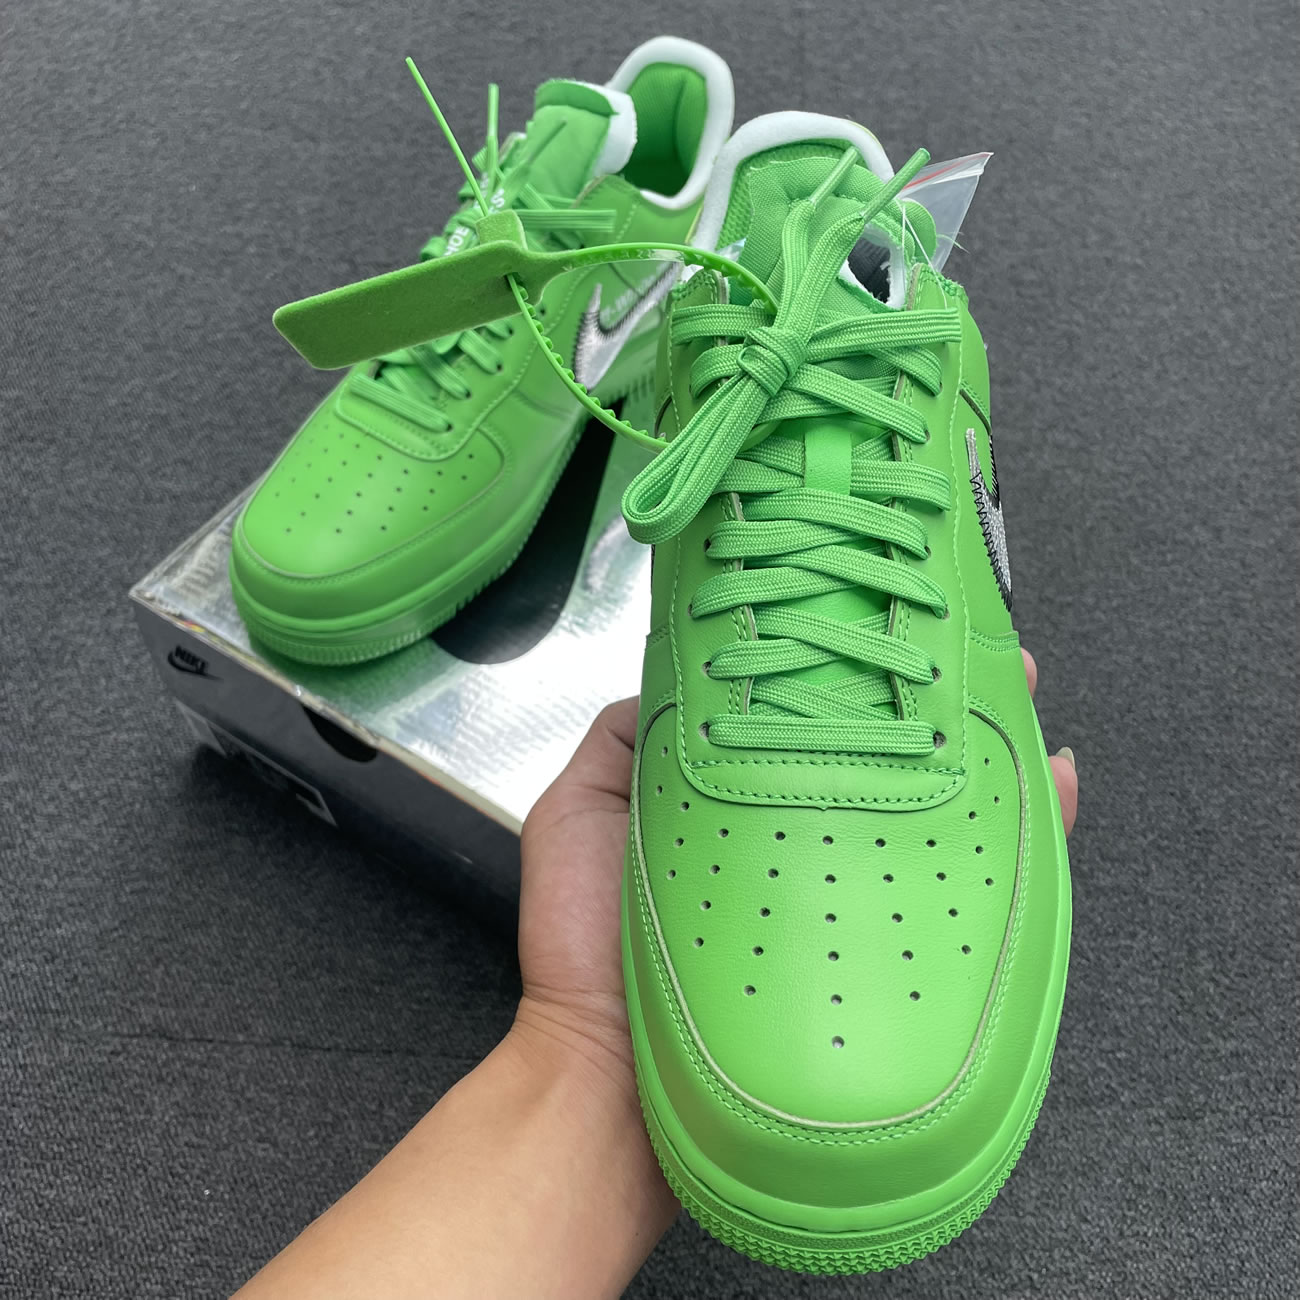 Off White Nike Air Force 1 Low Light Green (43) - newkick.org